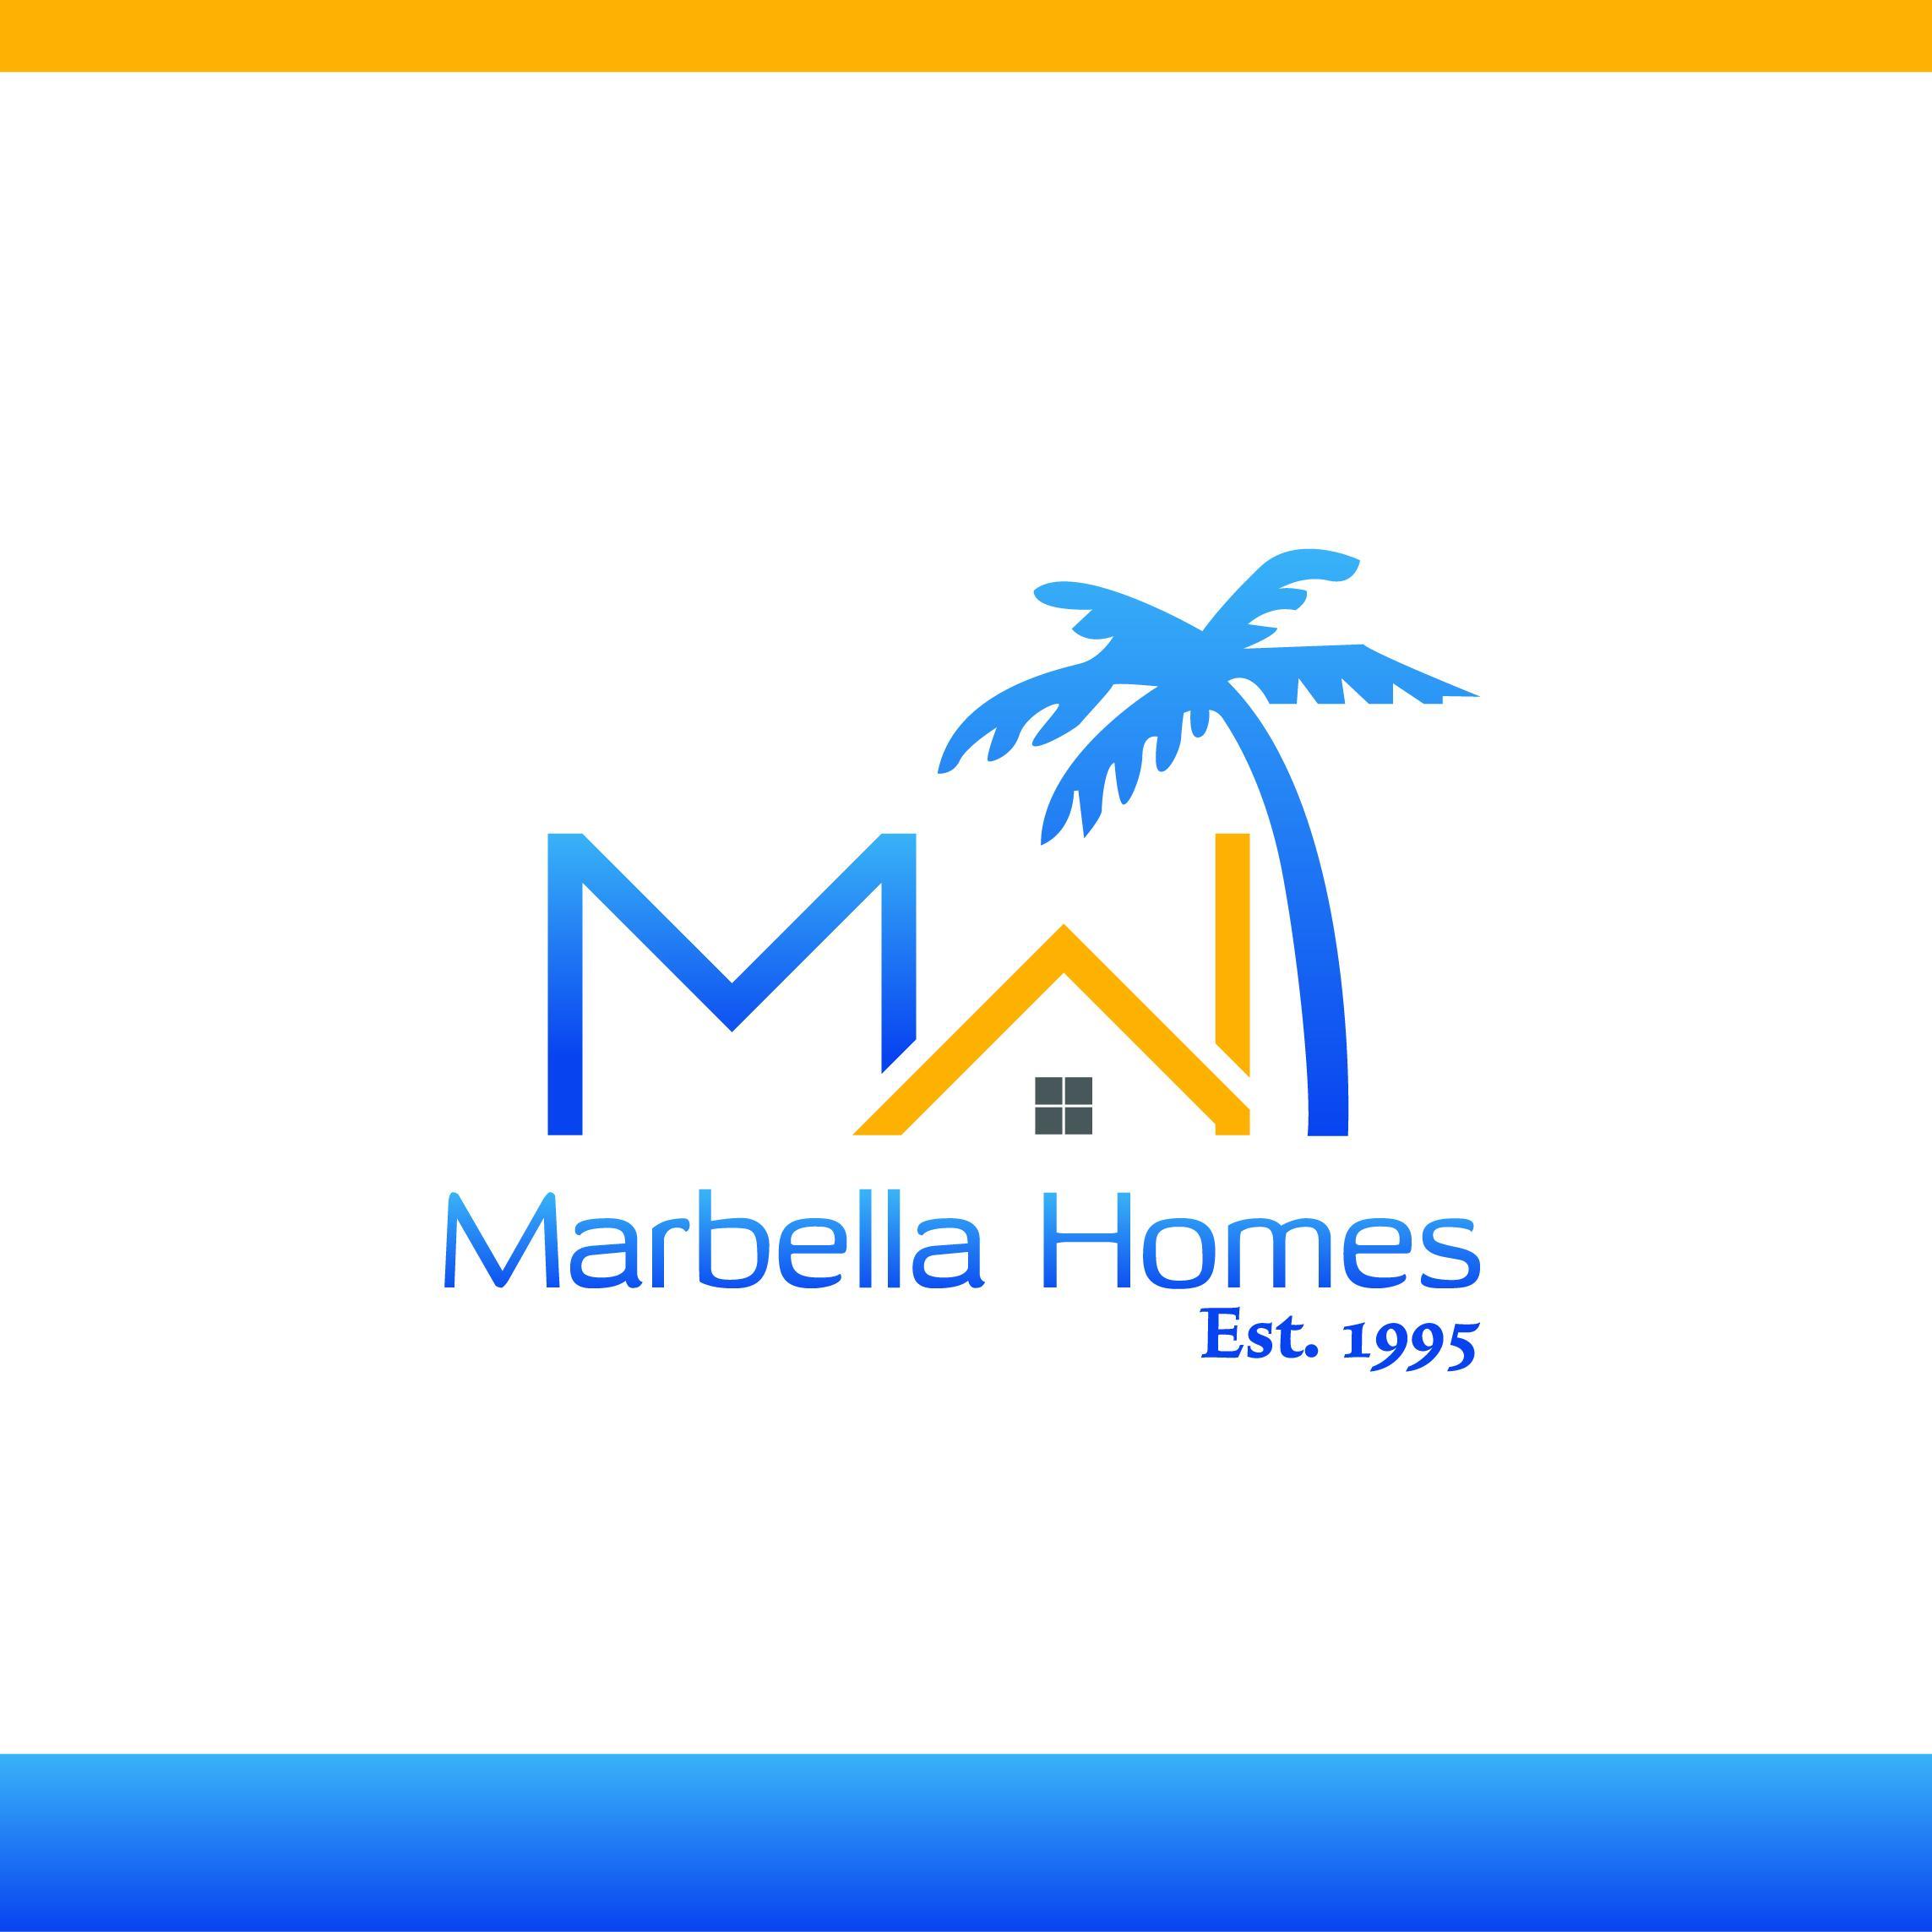 Marbella Homes have specialised in the sale of luxury villas and apartments in the Marbella area since 1995.